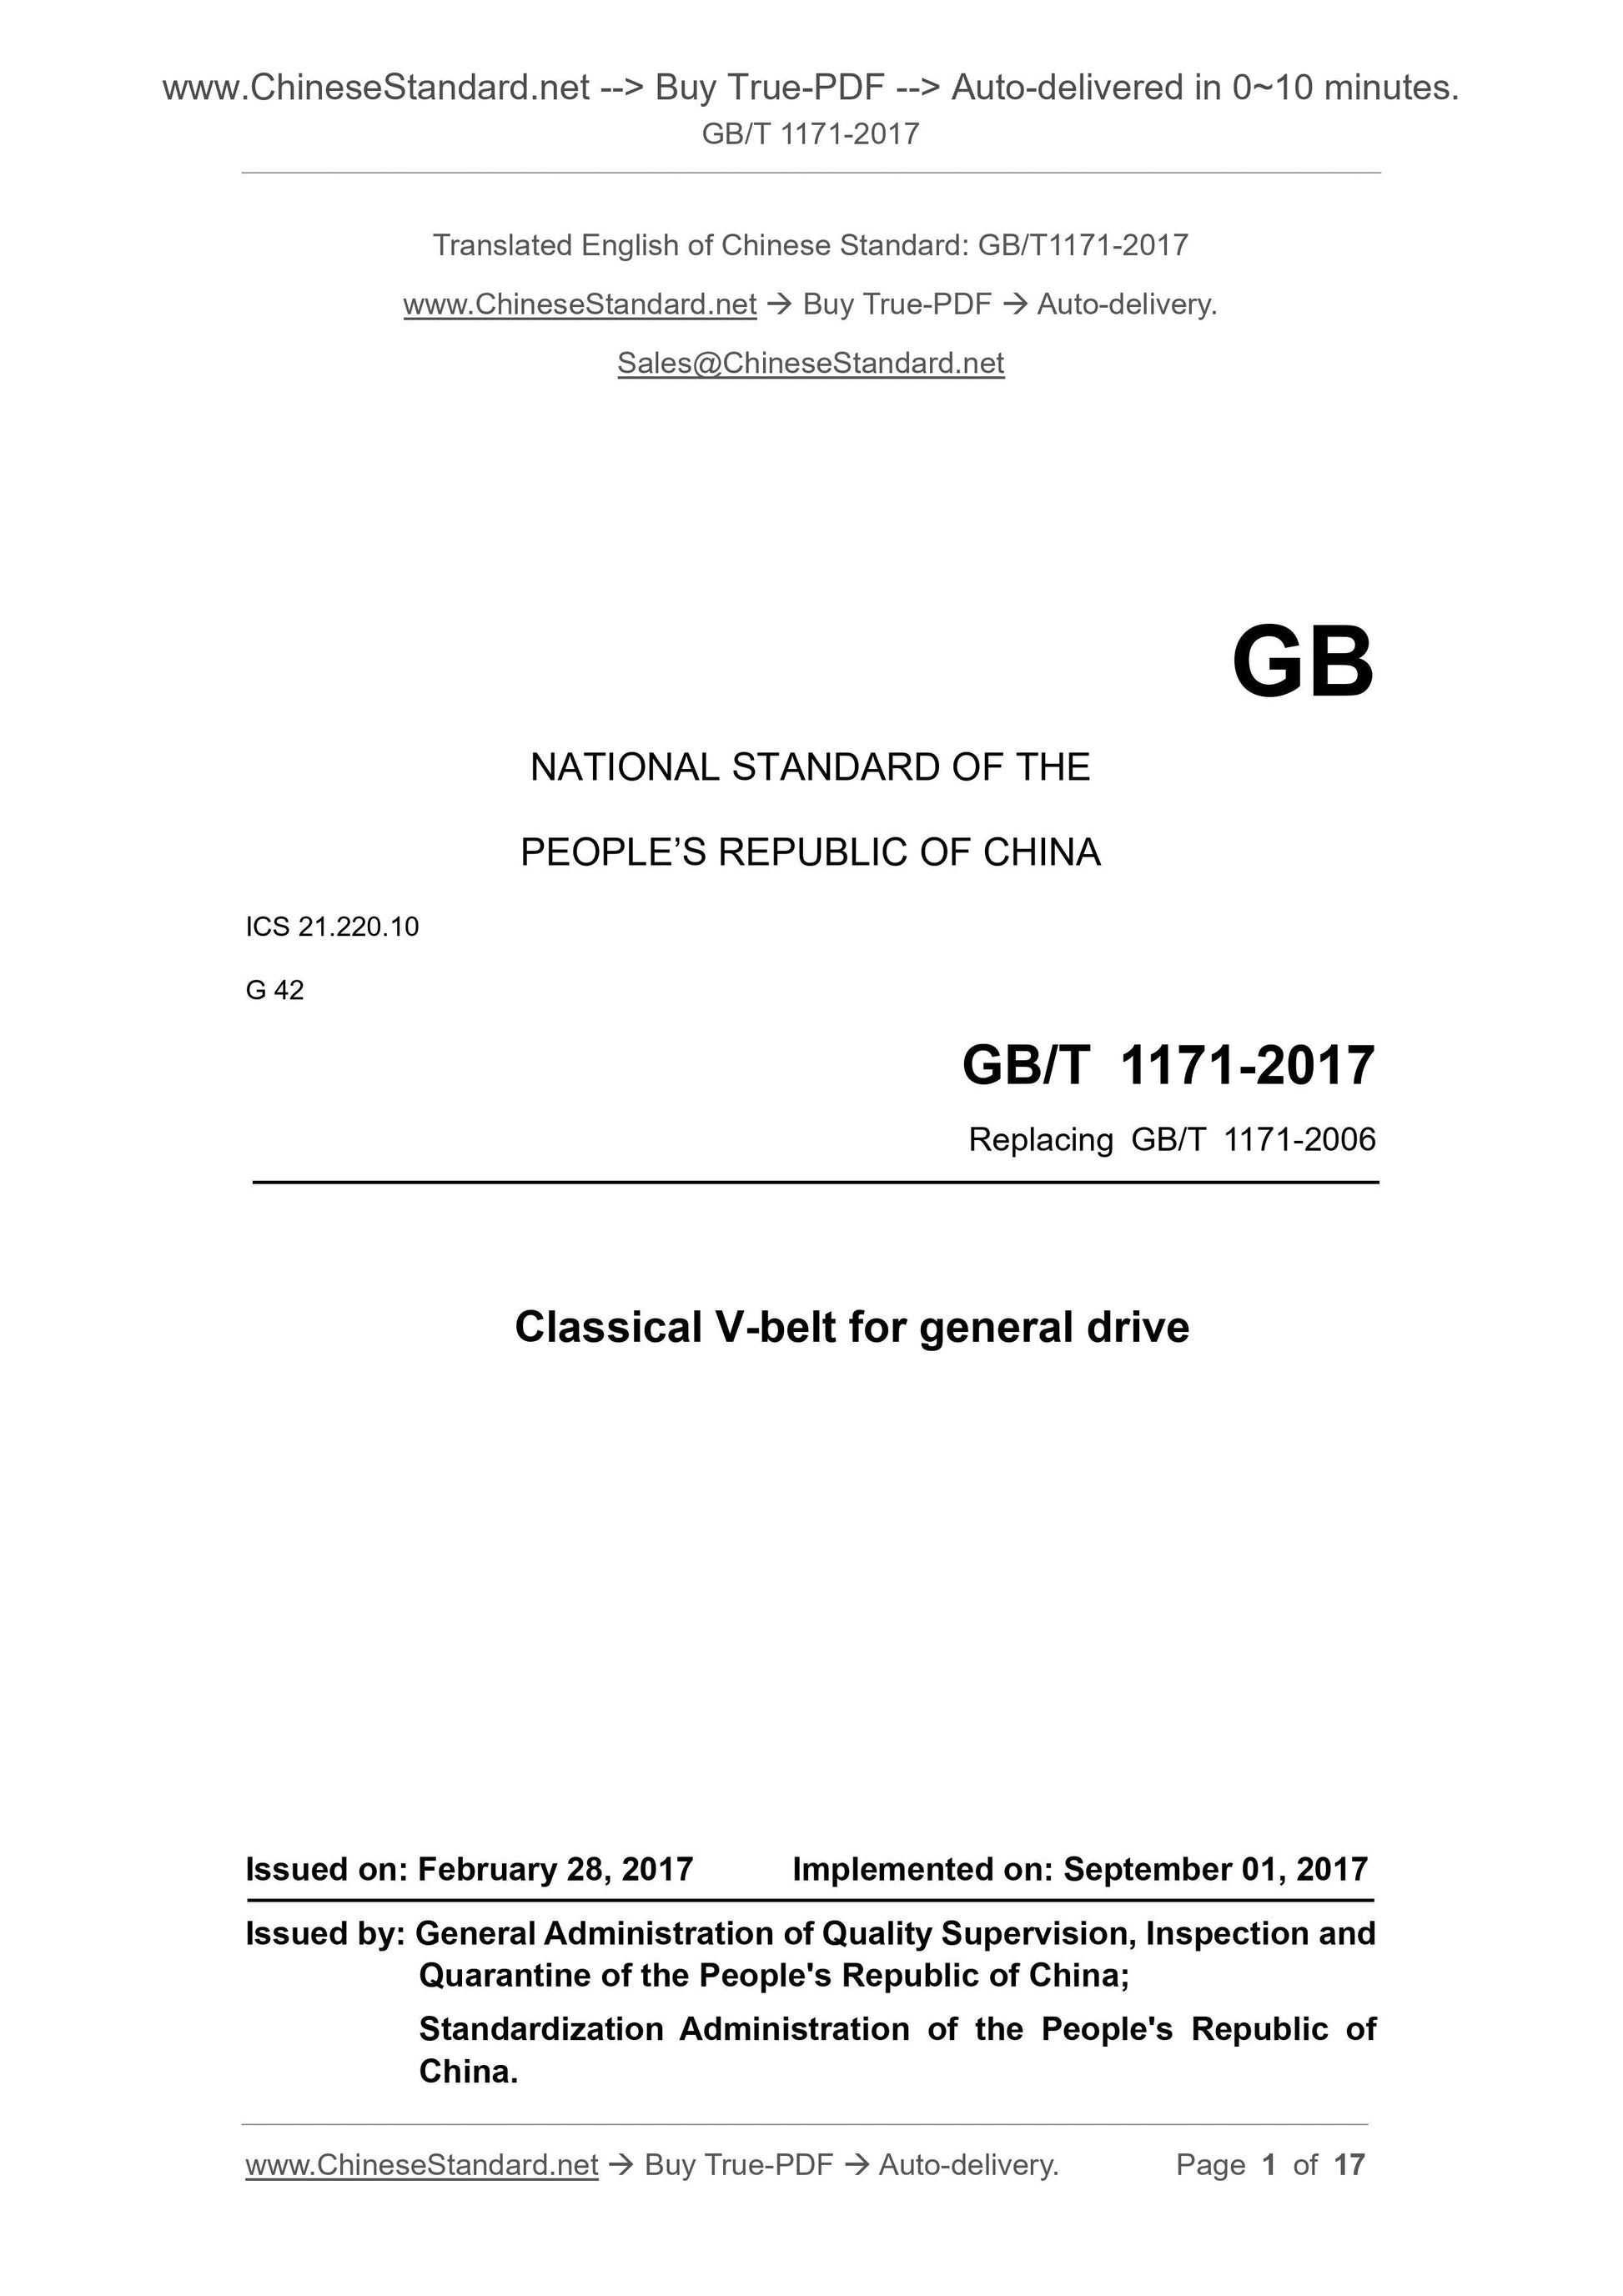 GB/T 1171-2017 Page 1